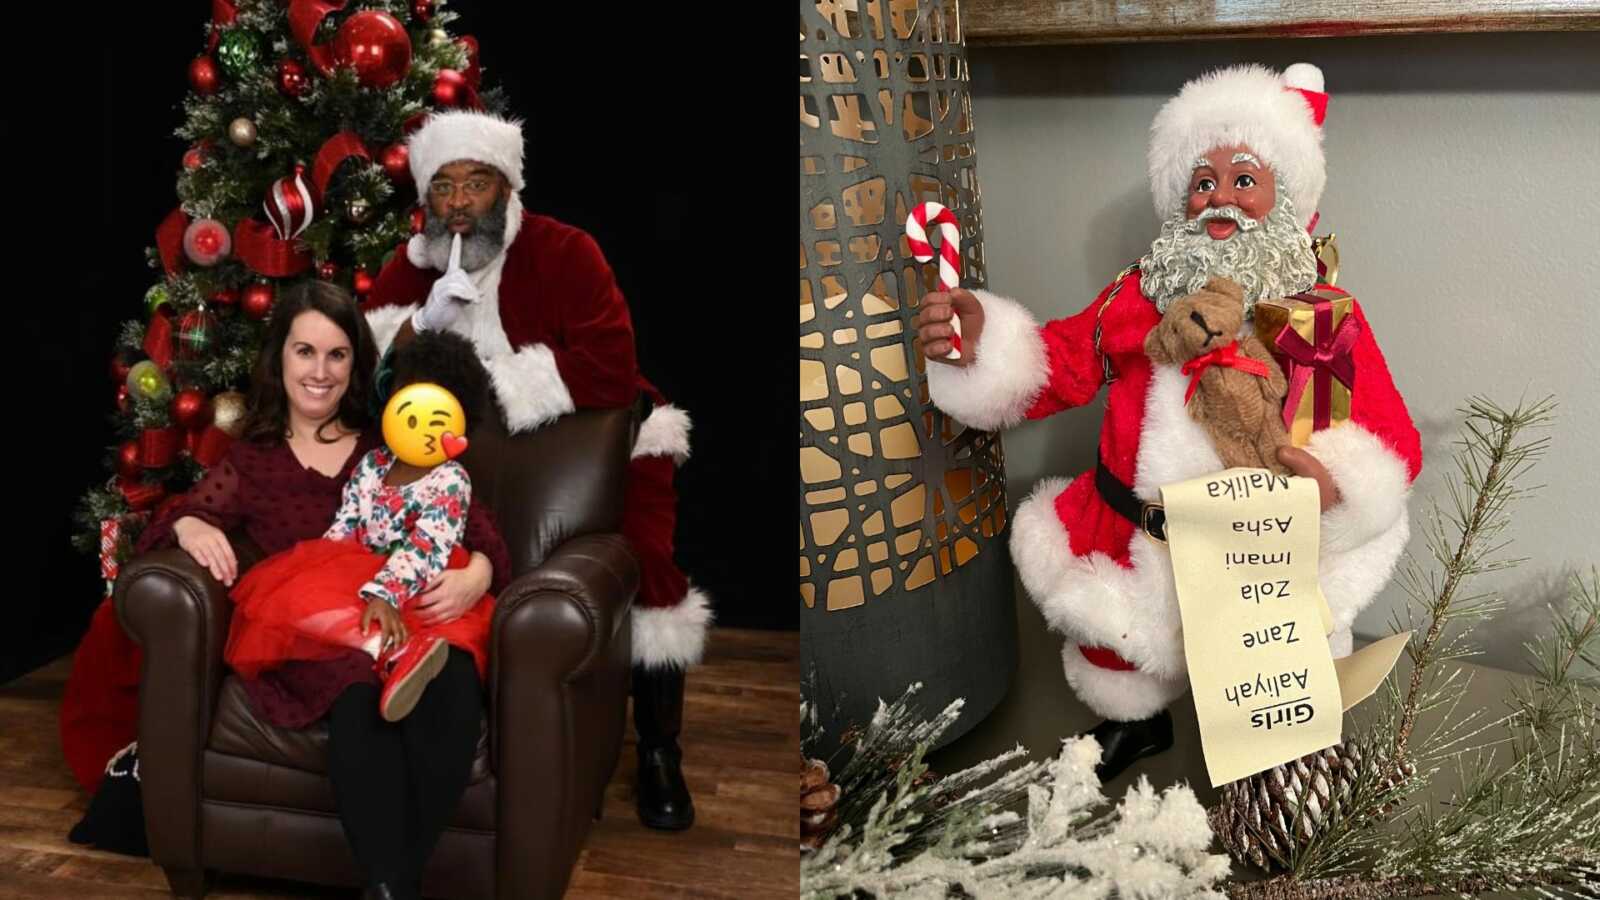 foster mom using black santas to ensure her foster daughter grows up seeing diversity and feels seen